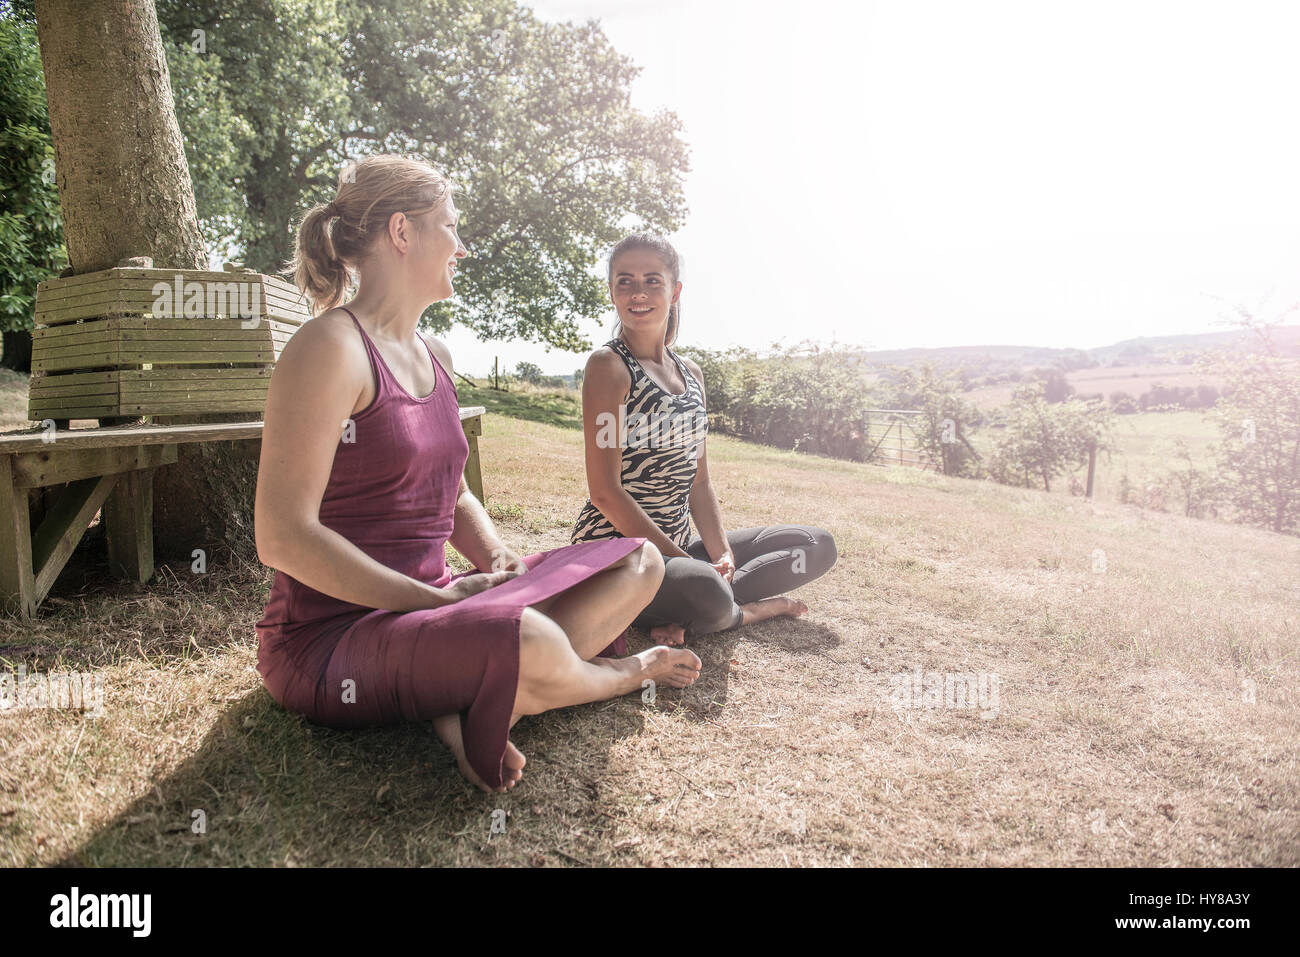 Two female friends sit and practice yoga outside Stock Photo